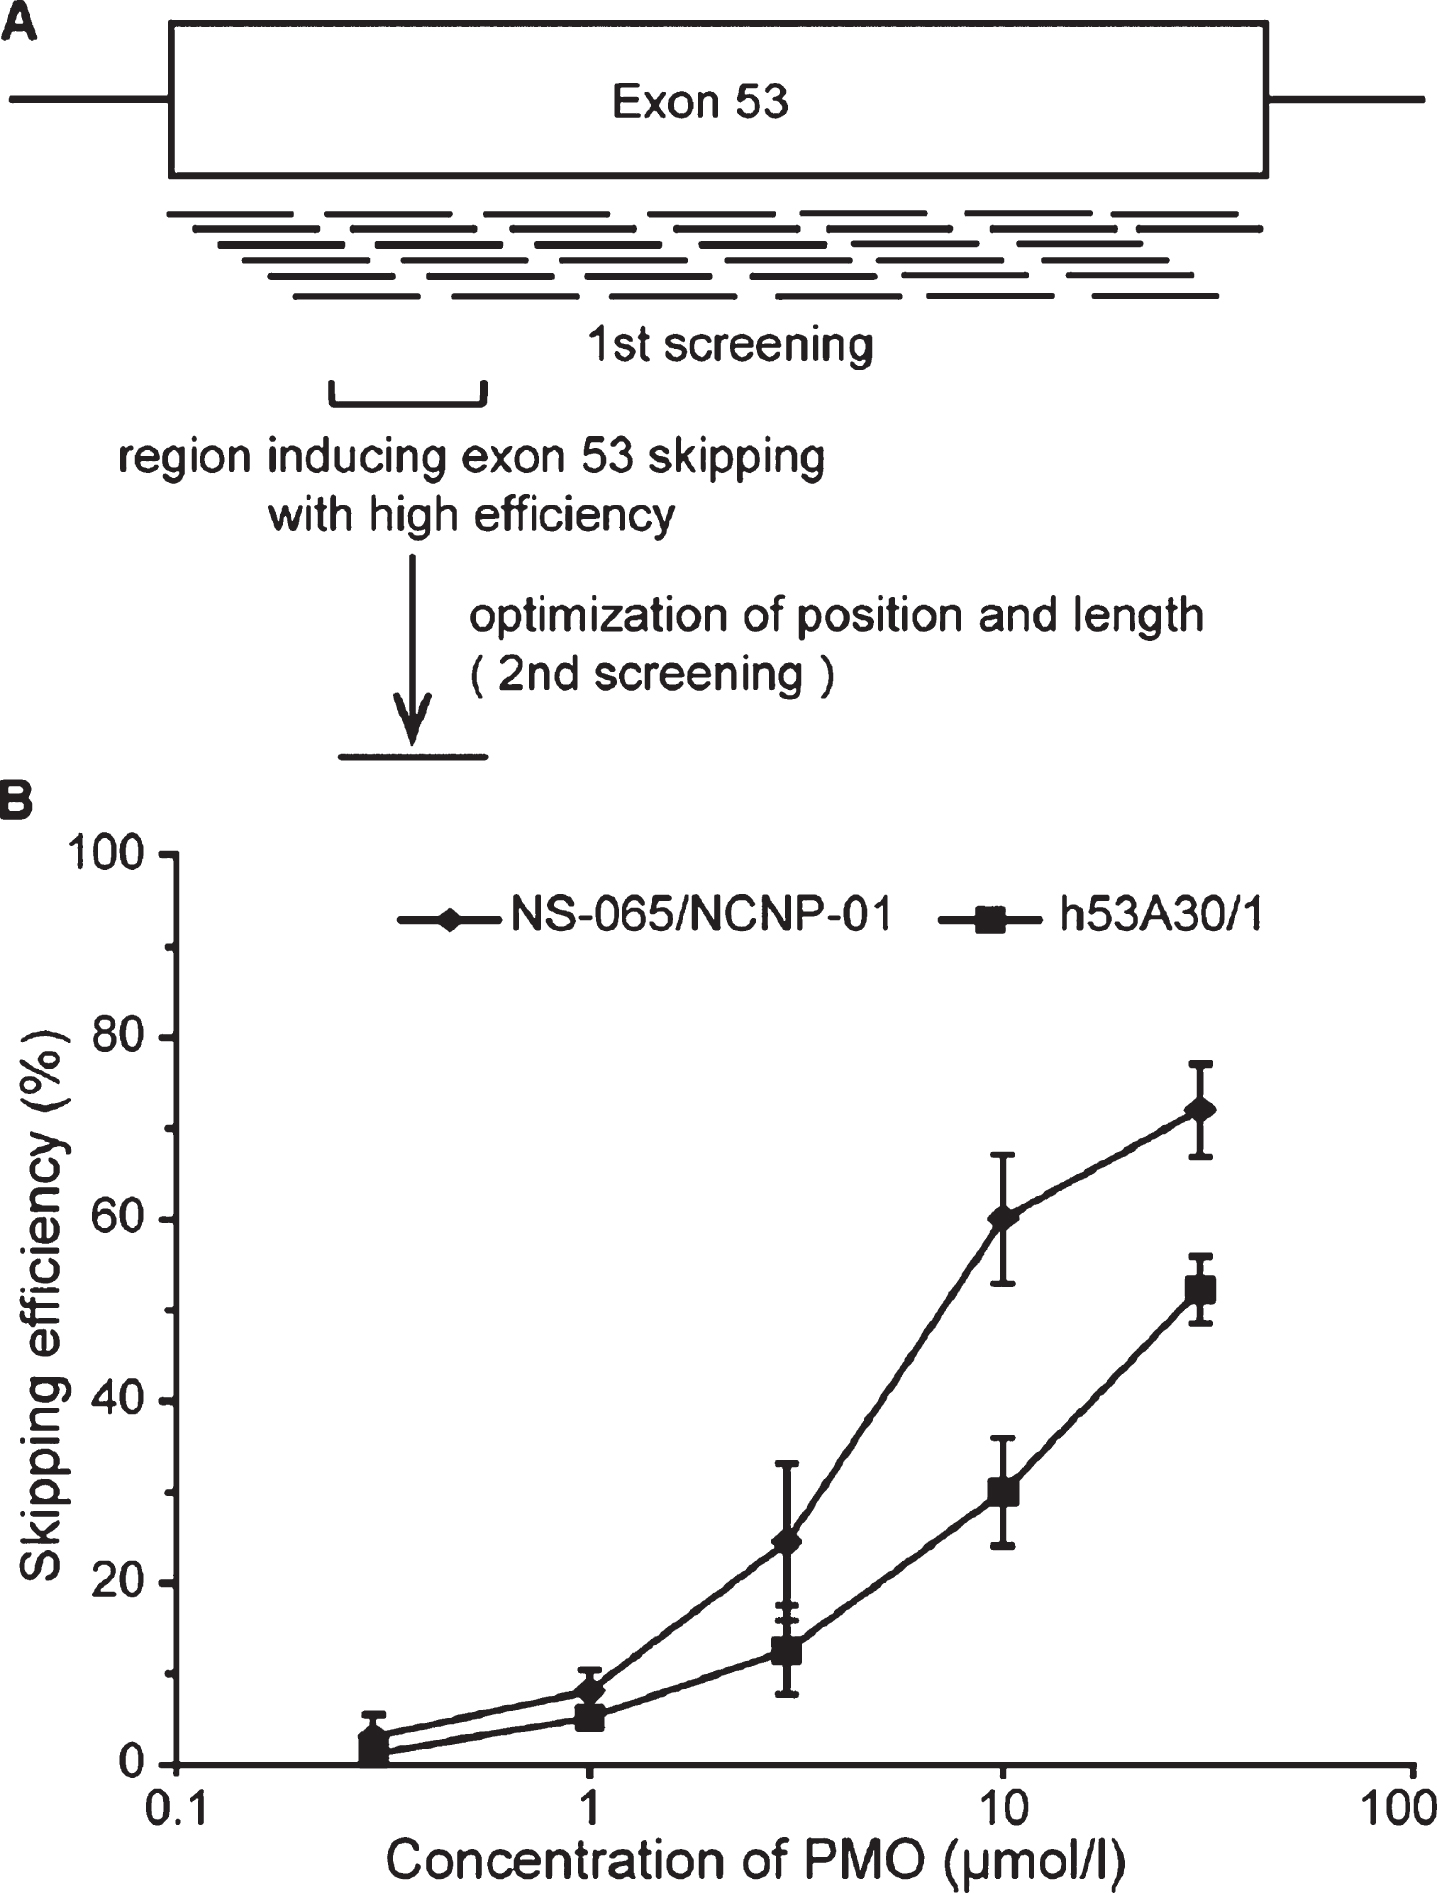 Lead candidate selection for exon 53 exon skipping. Panel A: Shown is a schematic of the 38 oligonucleotides tested for strength in blocking exon 53 splicing, and the experimental approach leading to lead compound selection (NS-065/NCNP-01; viltolarsen). Panel B: Dose-response analyses shows NS-065/NCNP-01 (viltolarsen) to achieve ∼70% exon skipping efficiency in cell cultures. From Watanabe et al. 2018 [62].